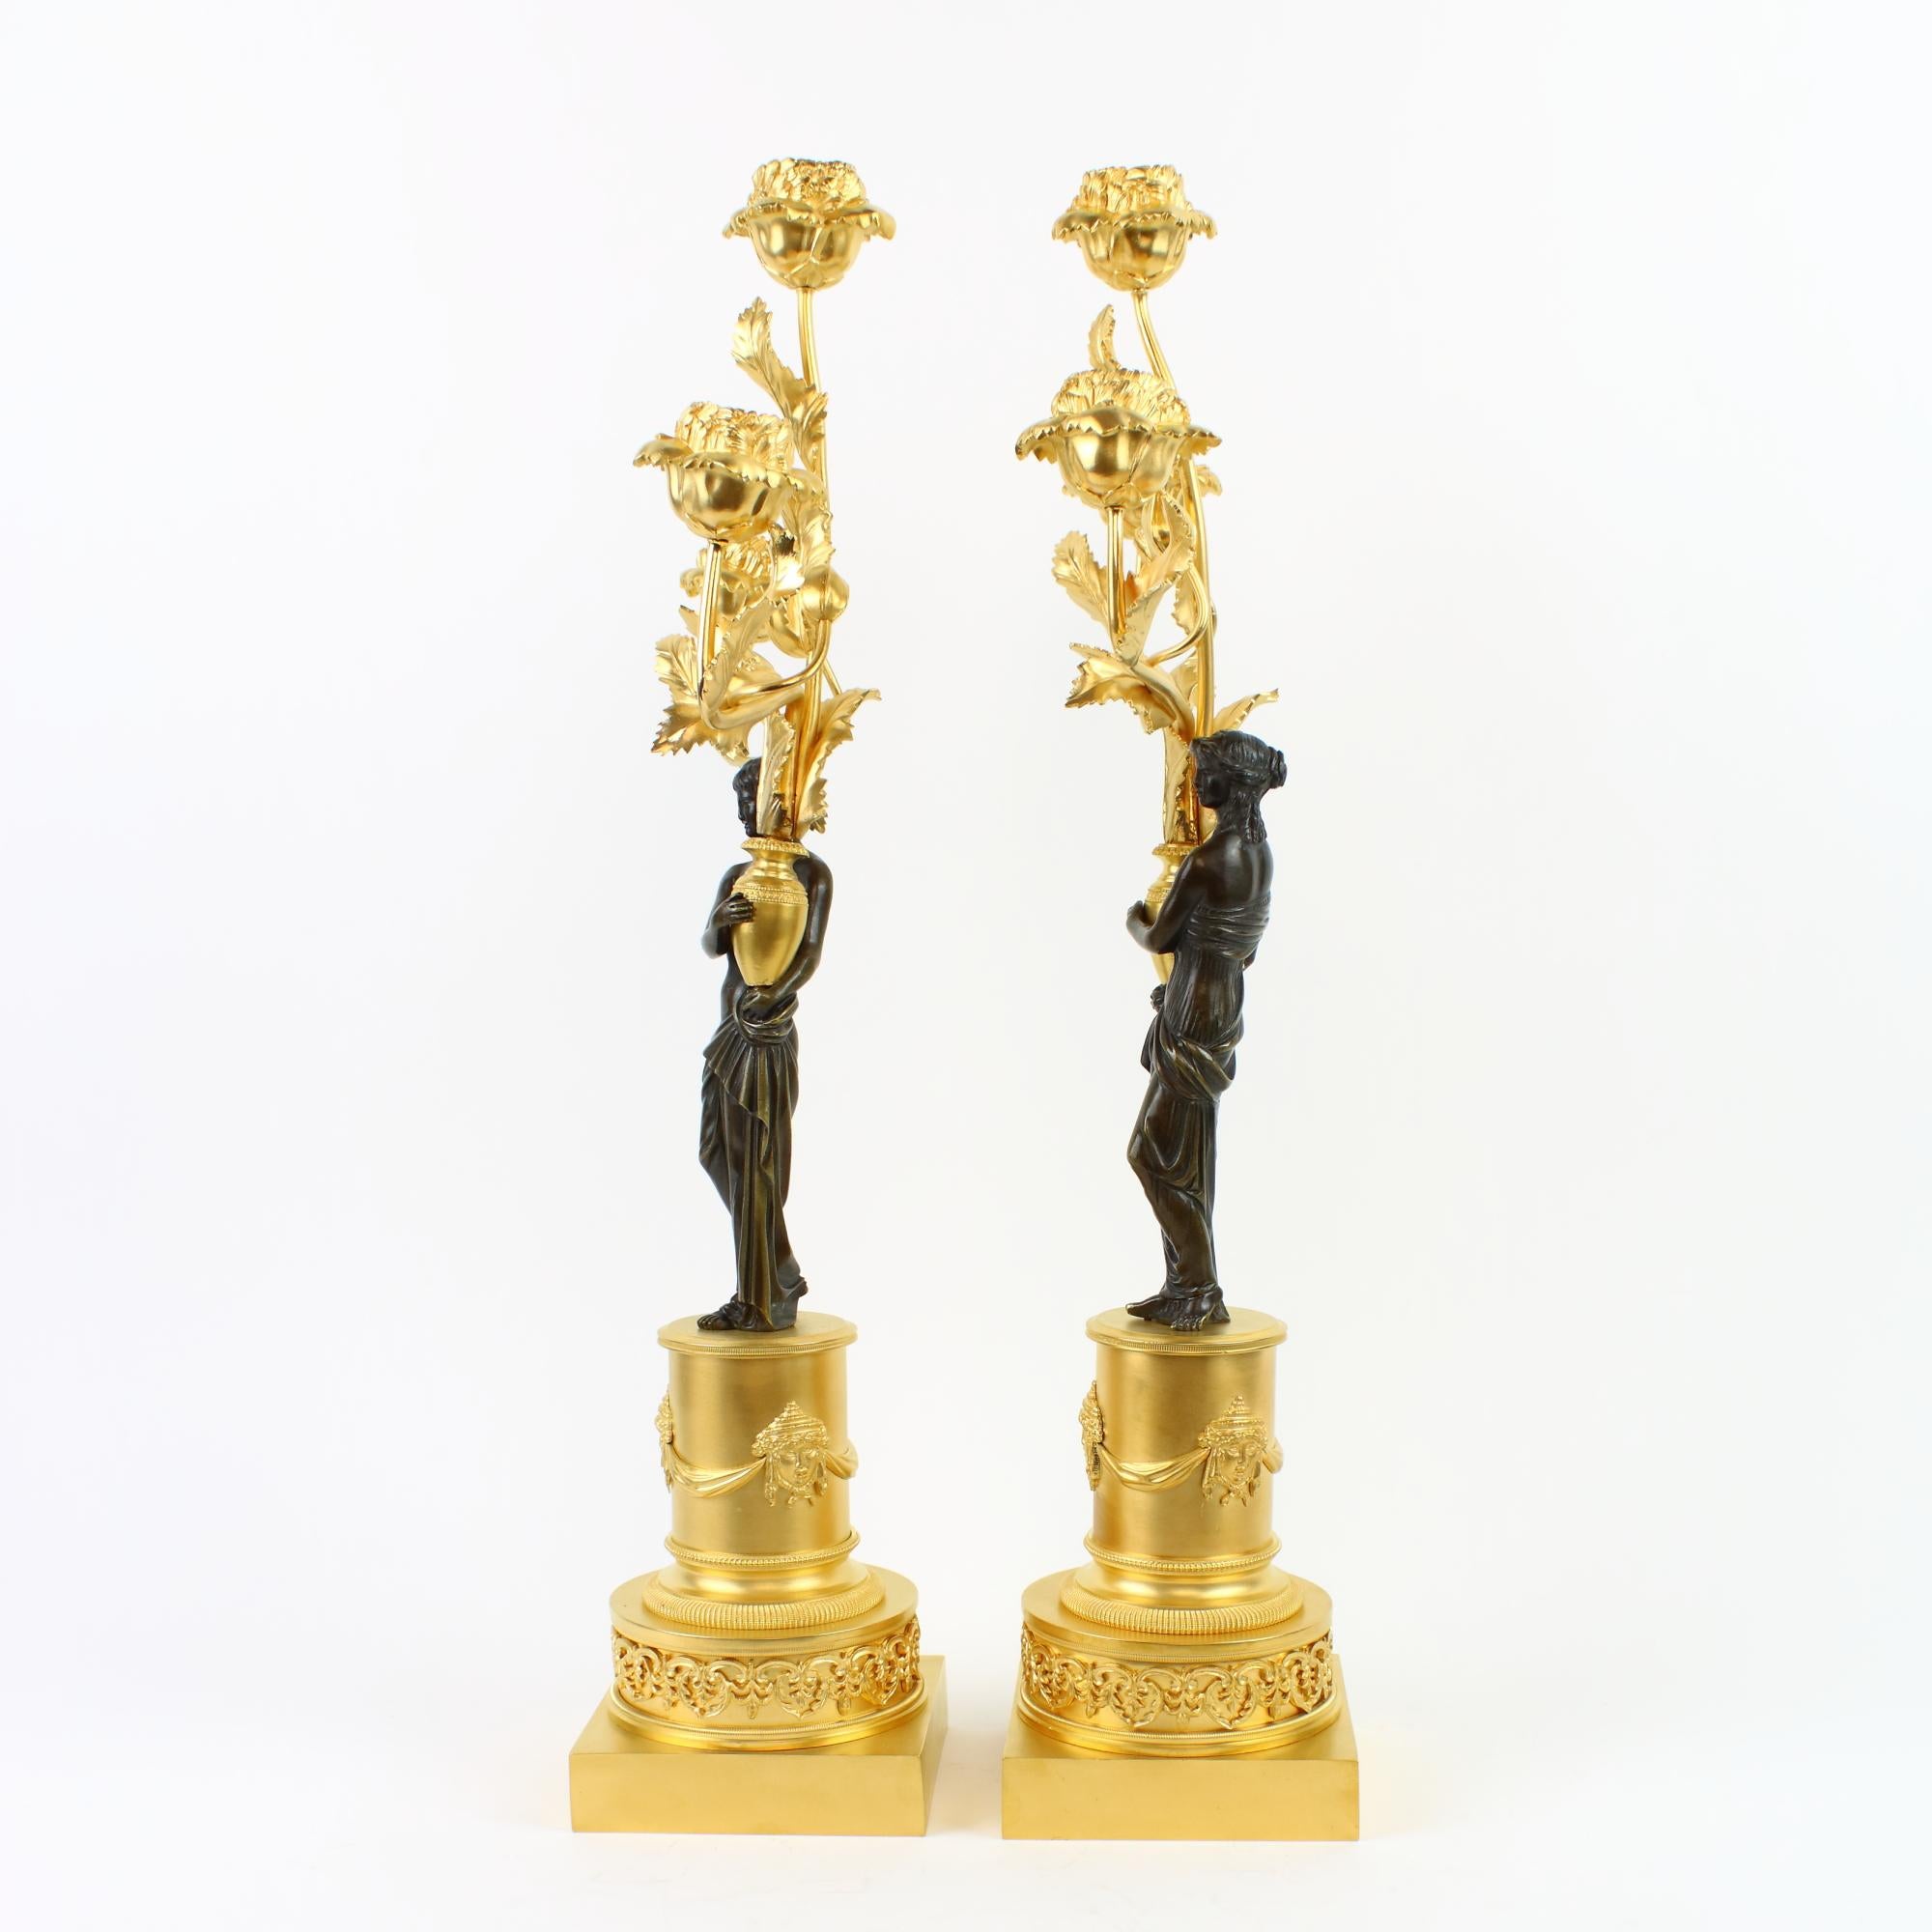 European 18th/19th Century Pair of Russian Figural Gilt and Patinated Bronze Candelabra For Sale